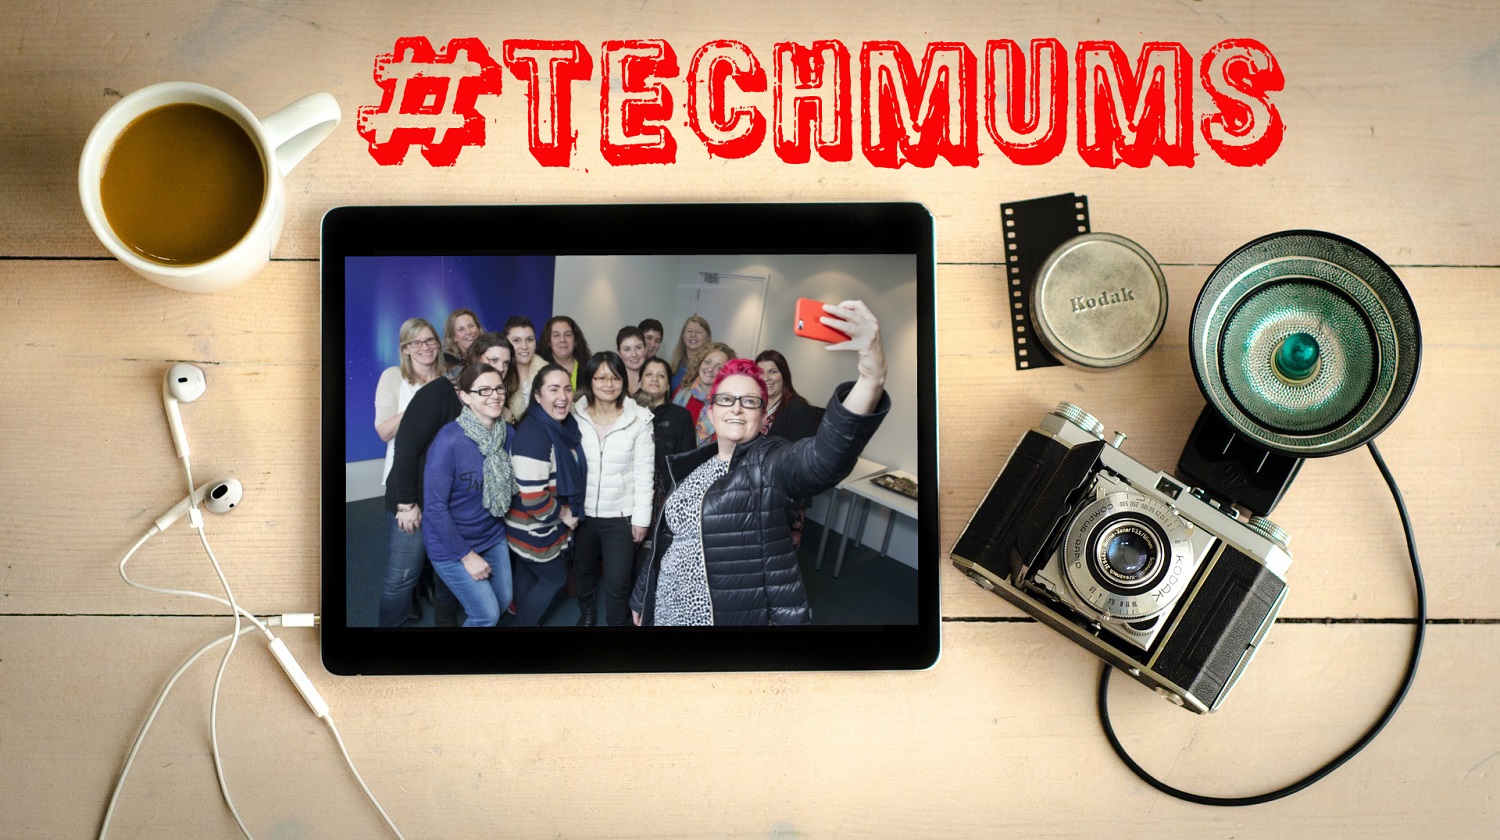 #Techmums digital innovation – the first of many